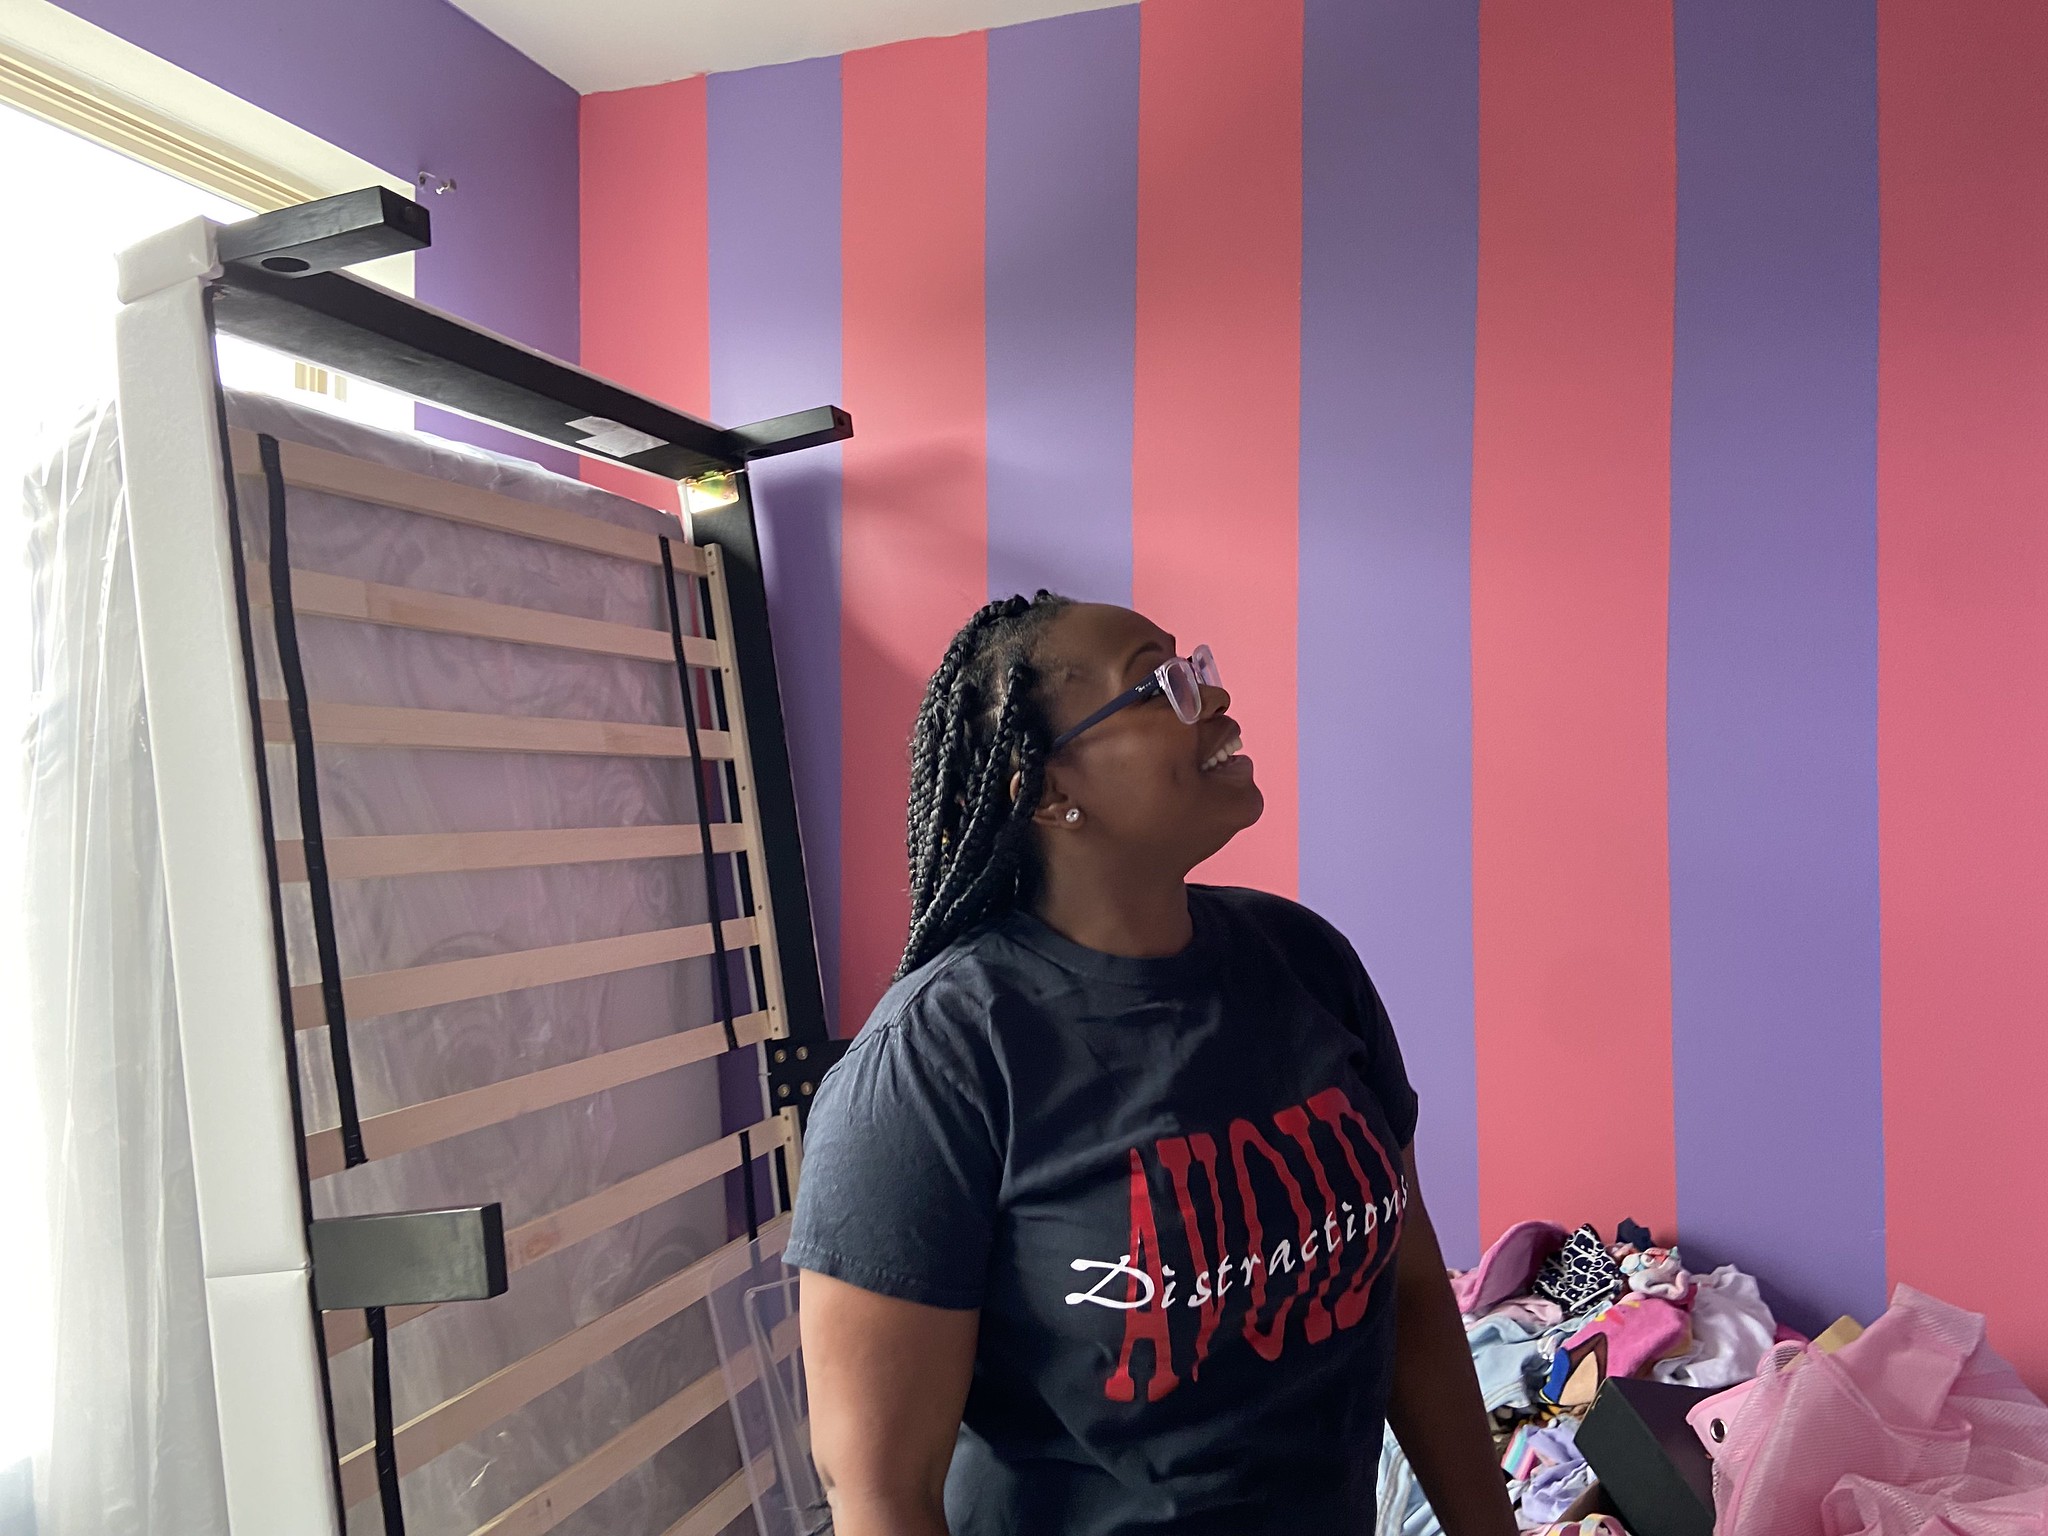 A woman looks up at the purple and pink striped walls of the room. A bed frame is pushed up against the wall behind her. 